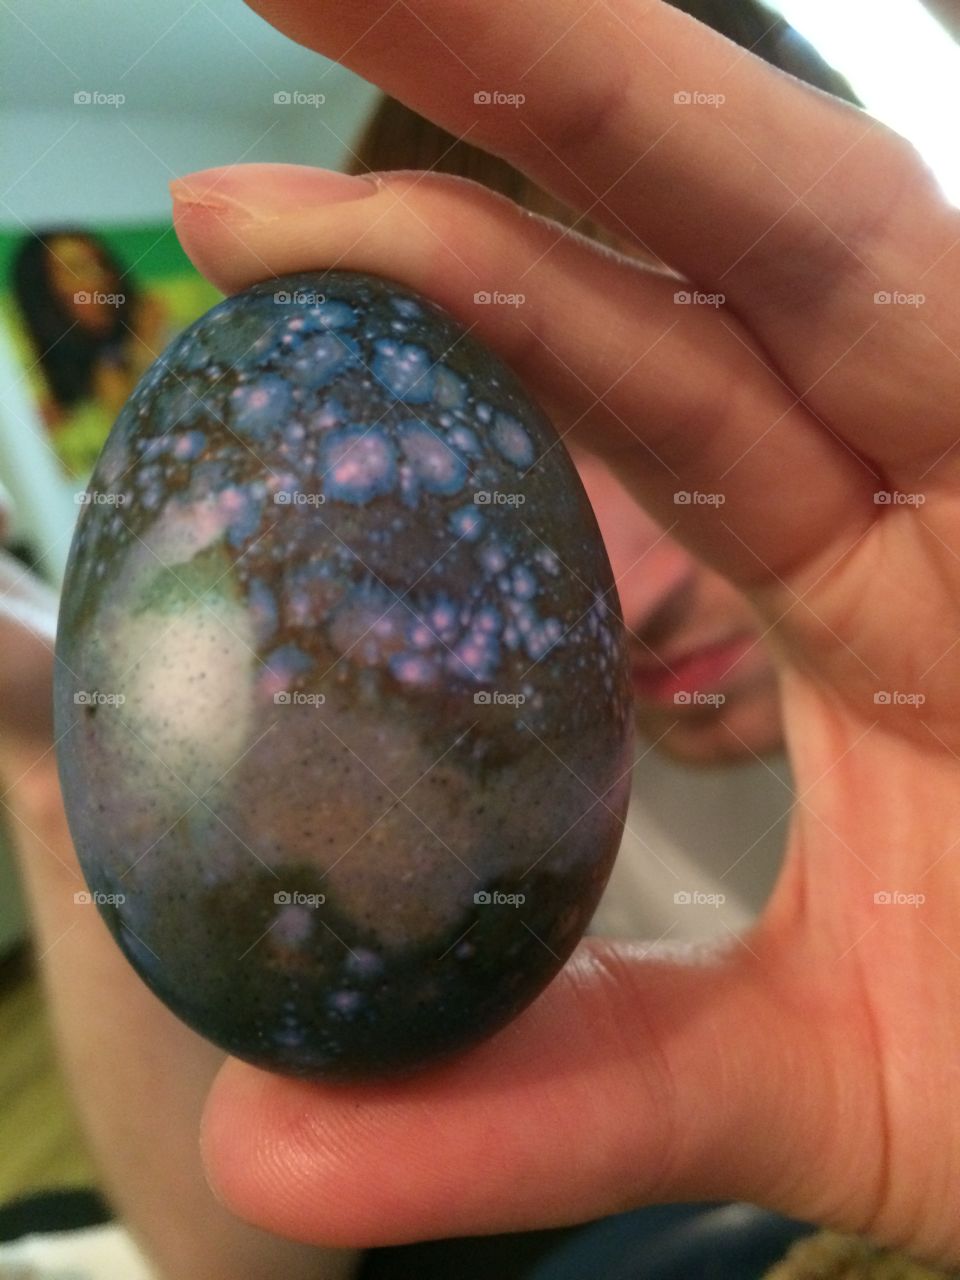 Our Galaxy is an Egg